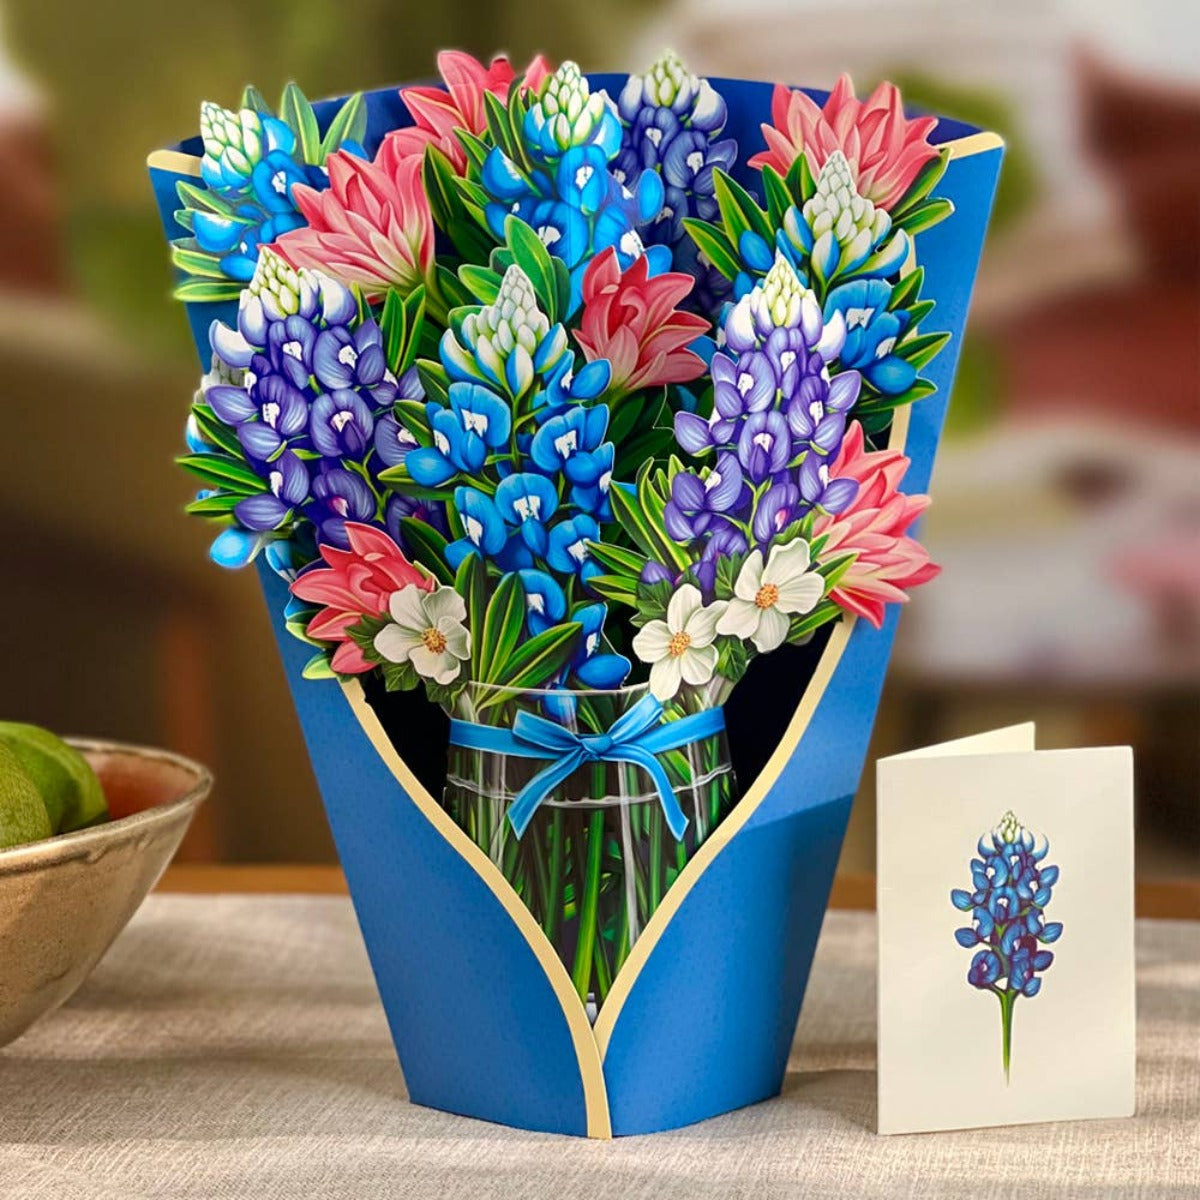 Blue Bonnets Pop-up Greeting Cards- The perfect gift Media 1 of 3